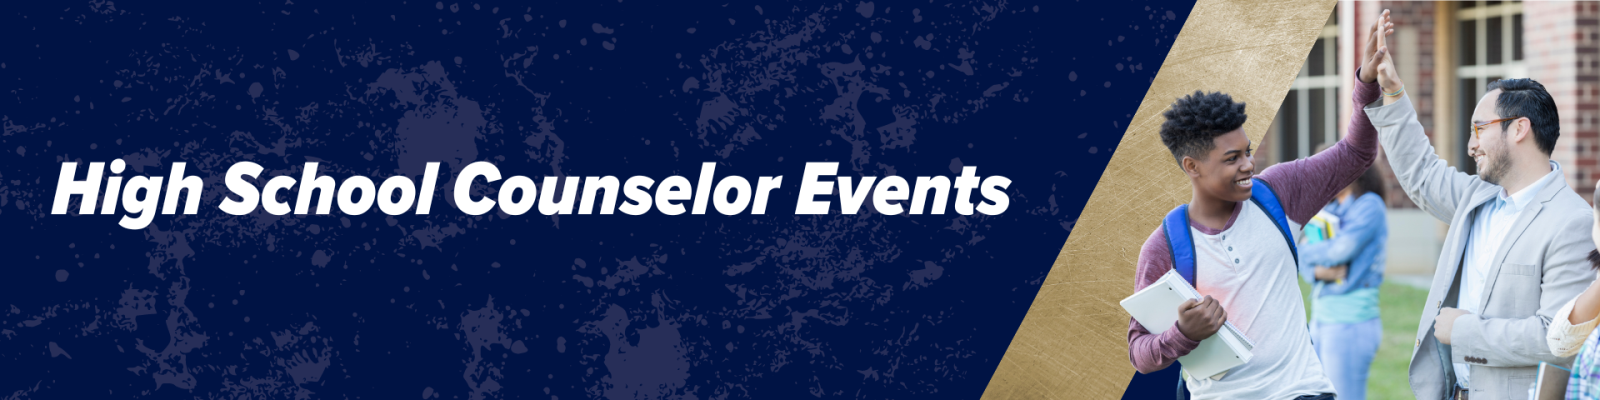 High School Counselor Events